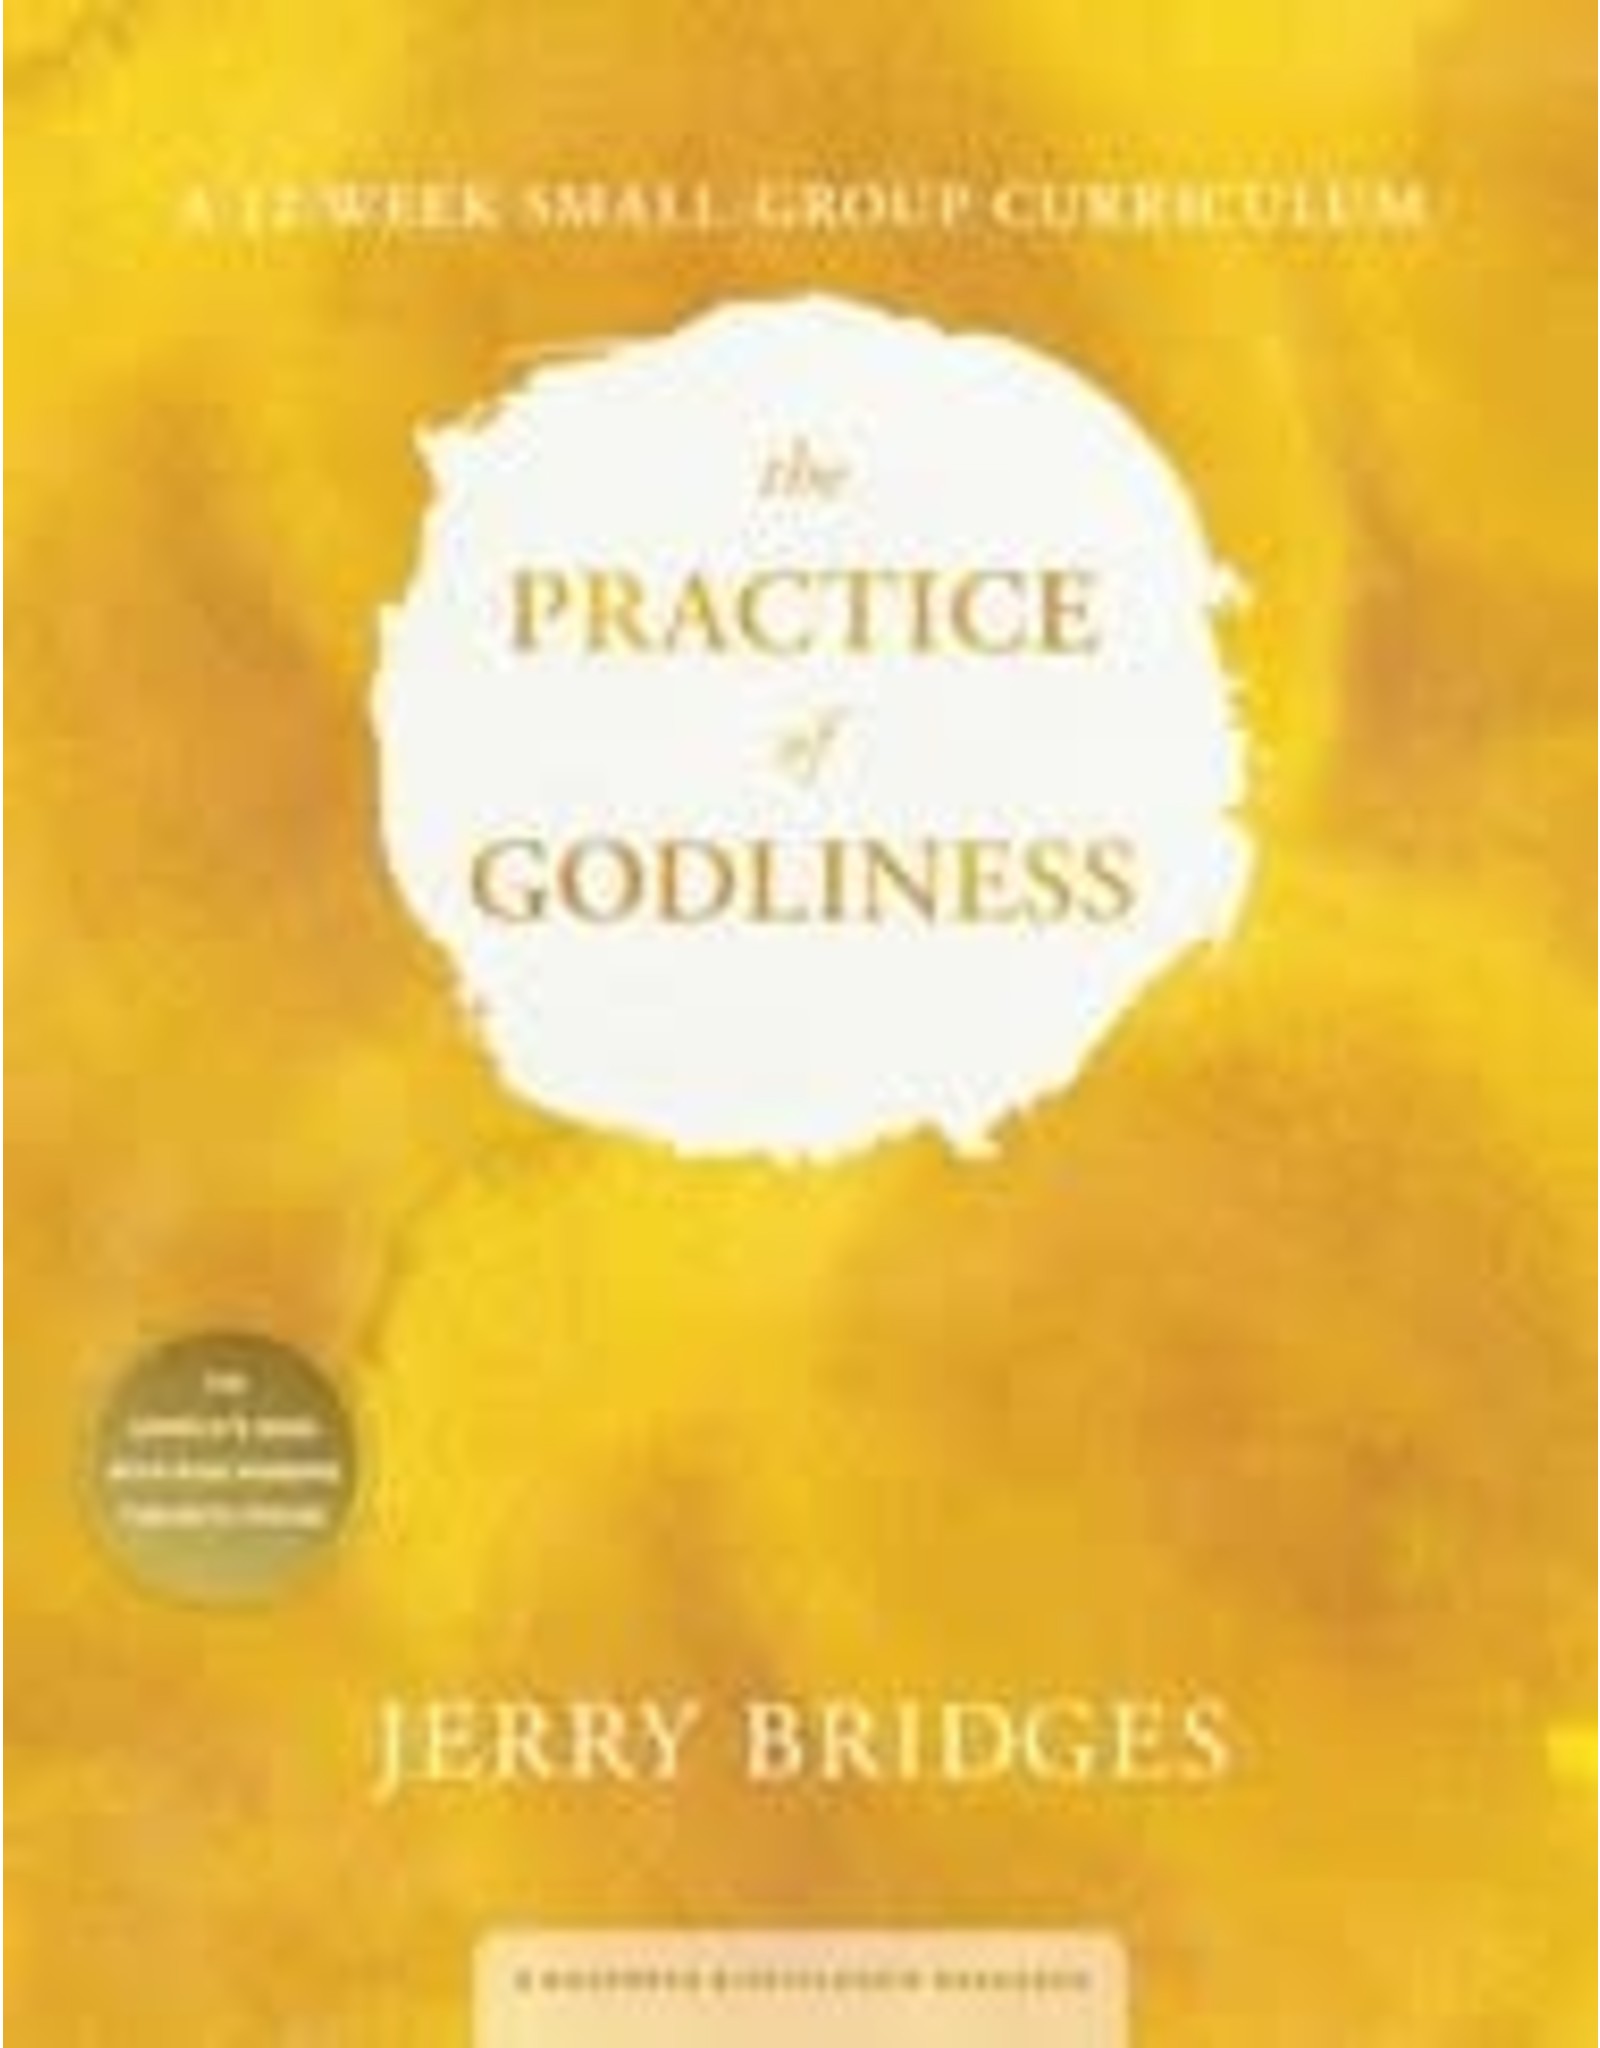 Jerry Bridges Practice of Godliness Discussion Guide